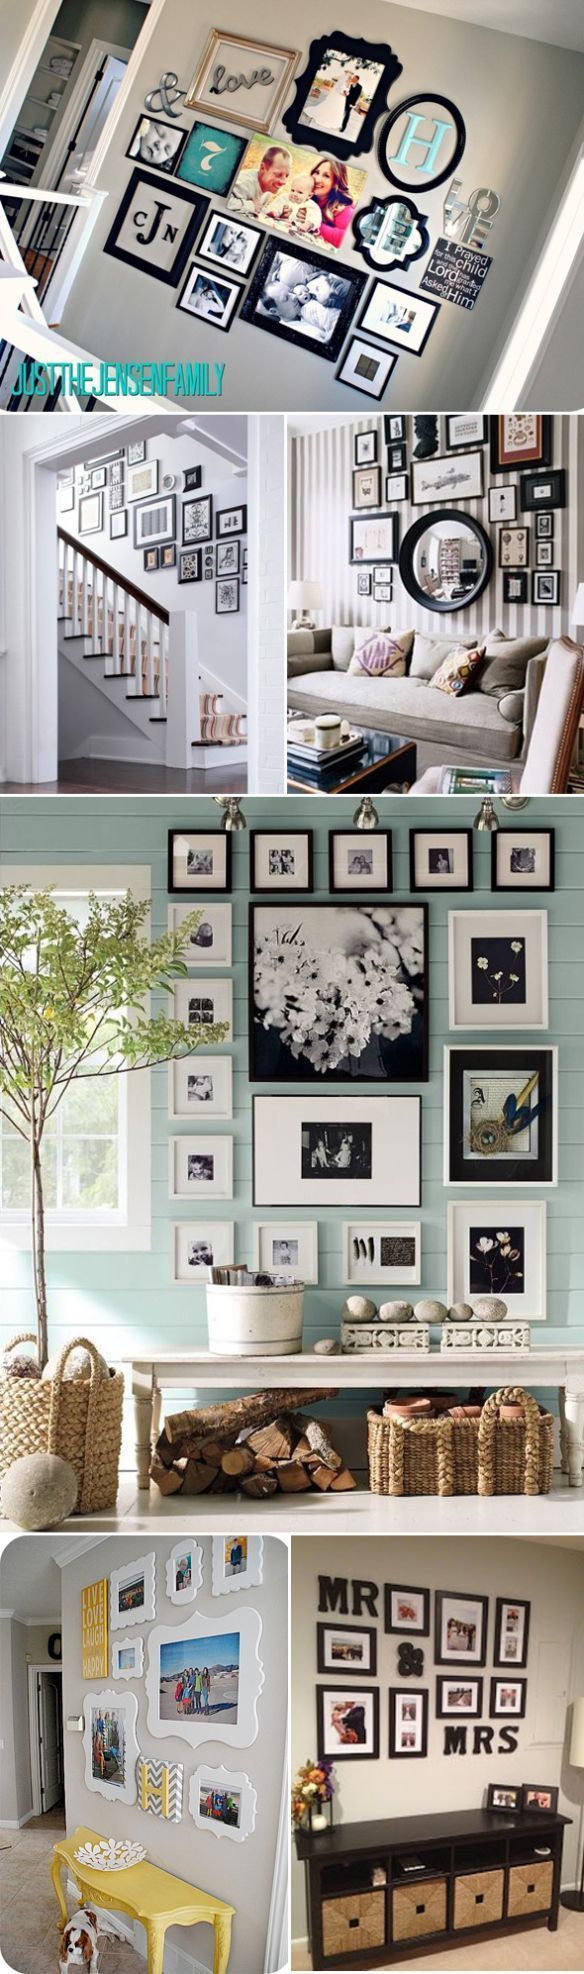 Great ideas for photo wall arrangements